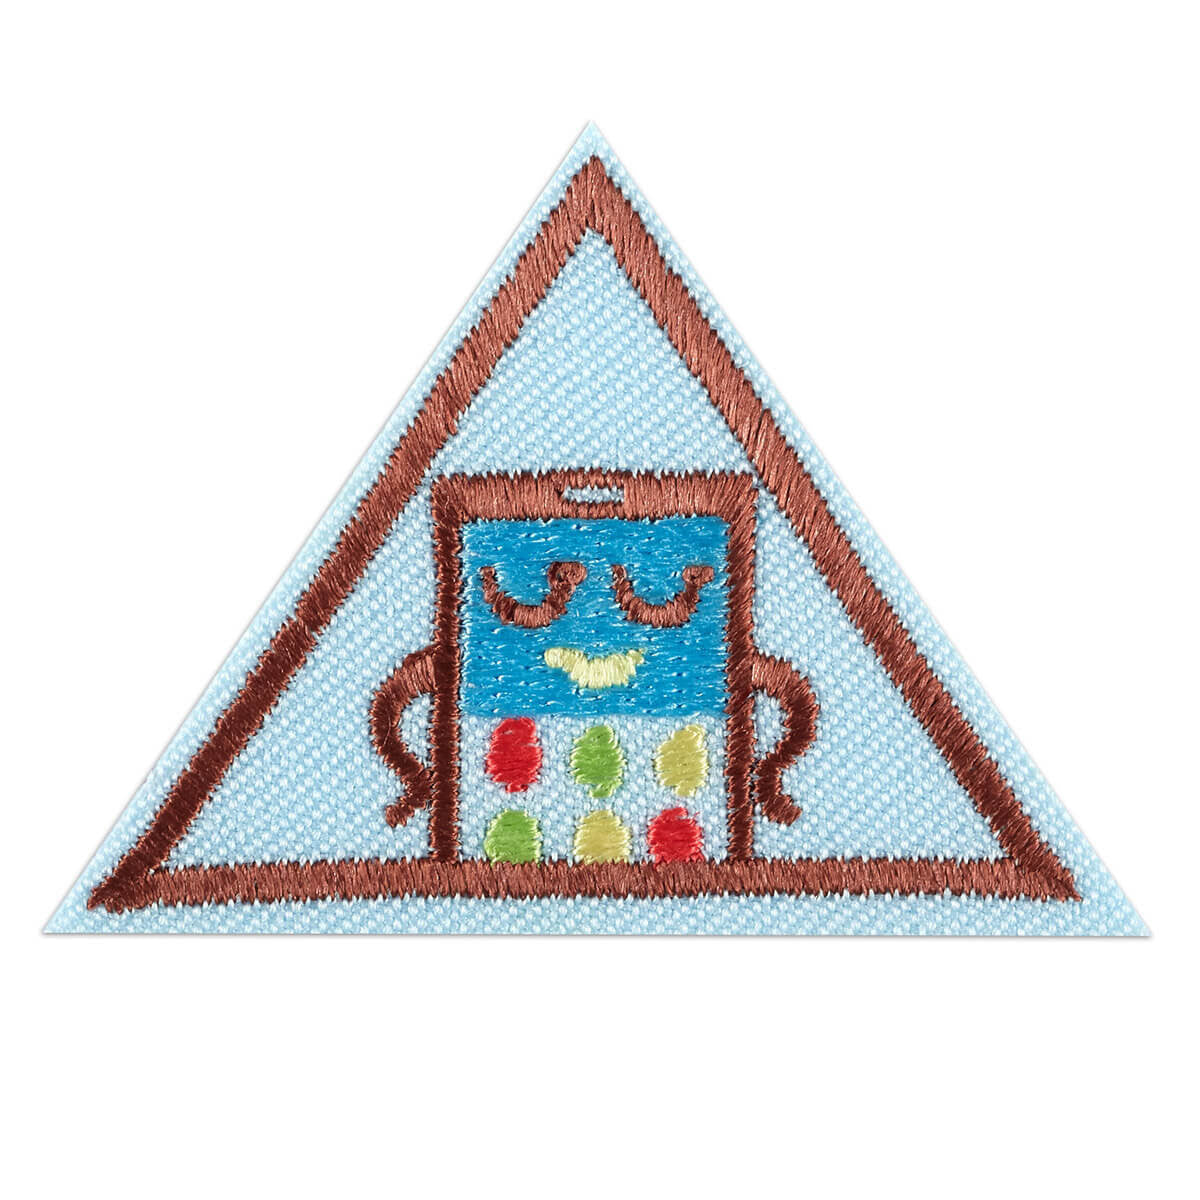 Girl Scouts Brownie App Development Badge - Basics Clothing Store